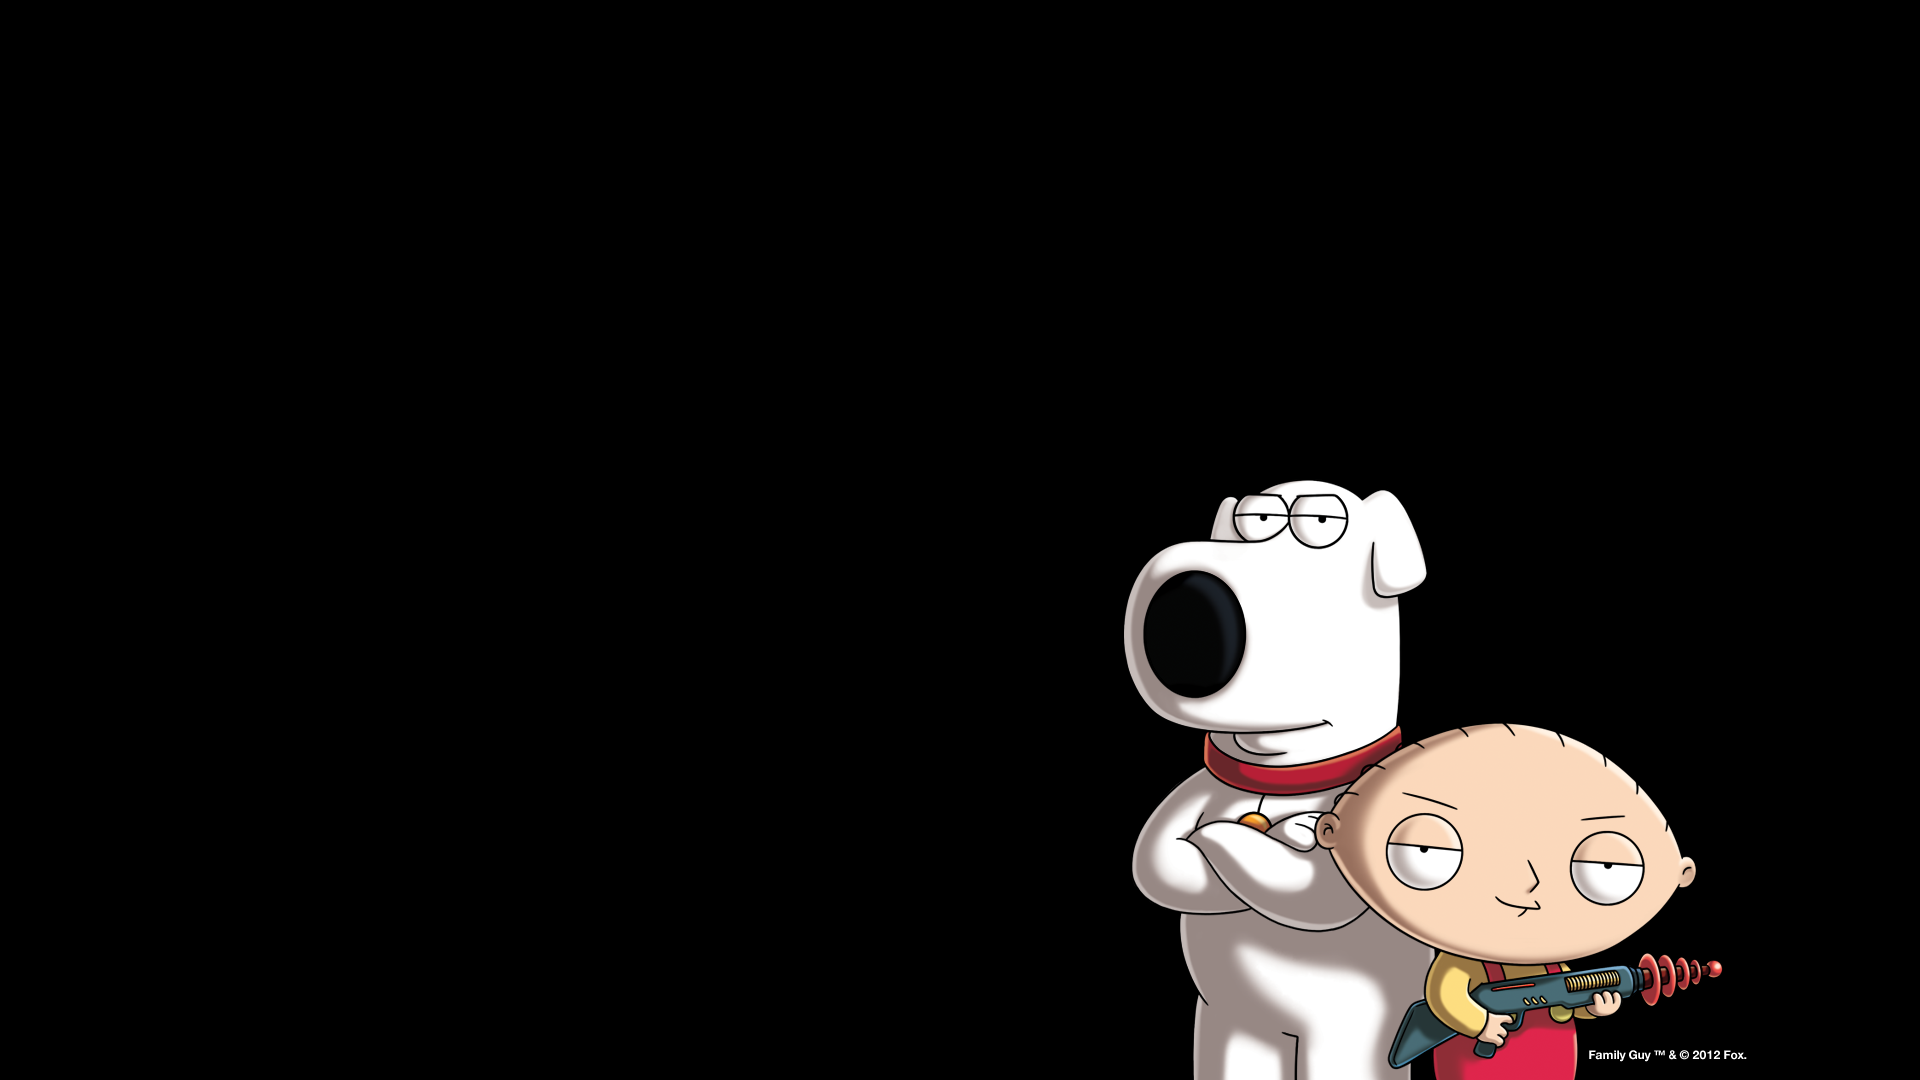 General 1920x1080 Family Guy Family Guy Back To The Multiverse video games Stewie Griffin Brian Griffin cartoon